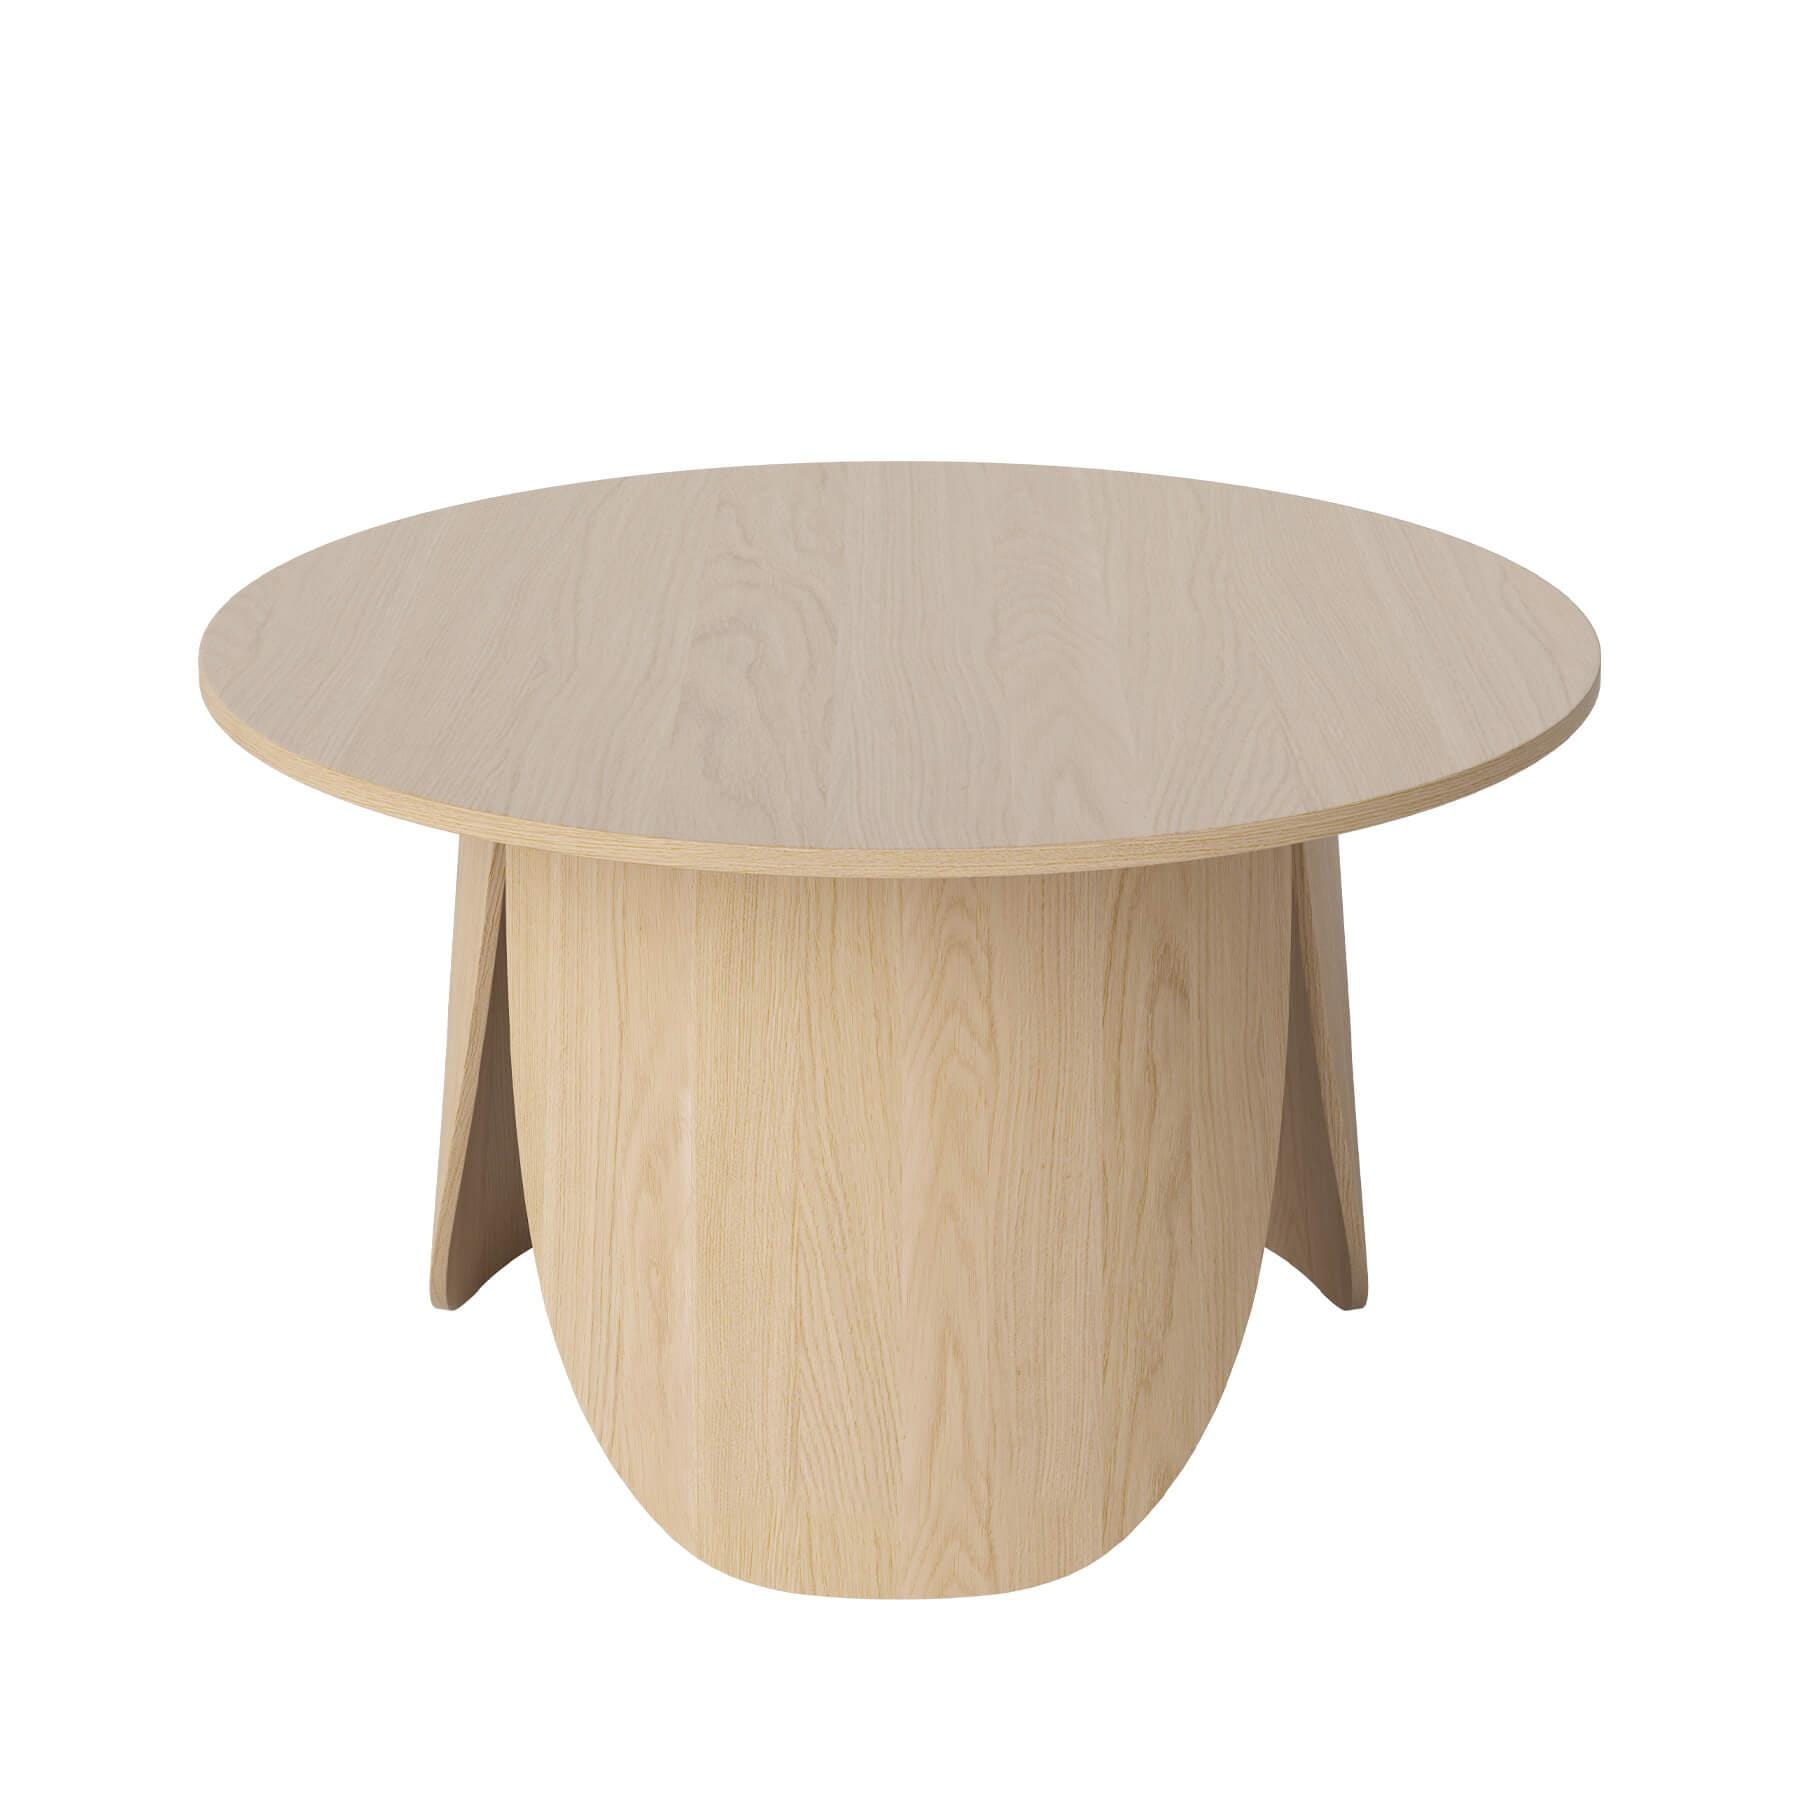 Bolia Peyote Coffee Table Large High White Lacquered Oak Light Wood Designer Furniture From Holloways Of Ludlow